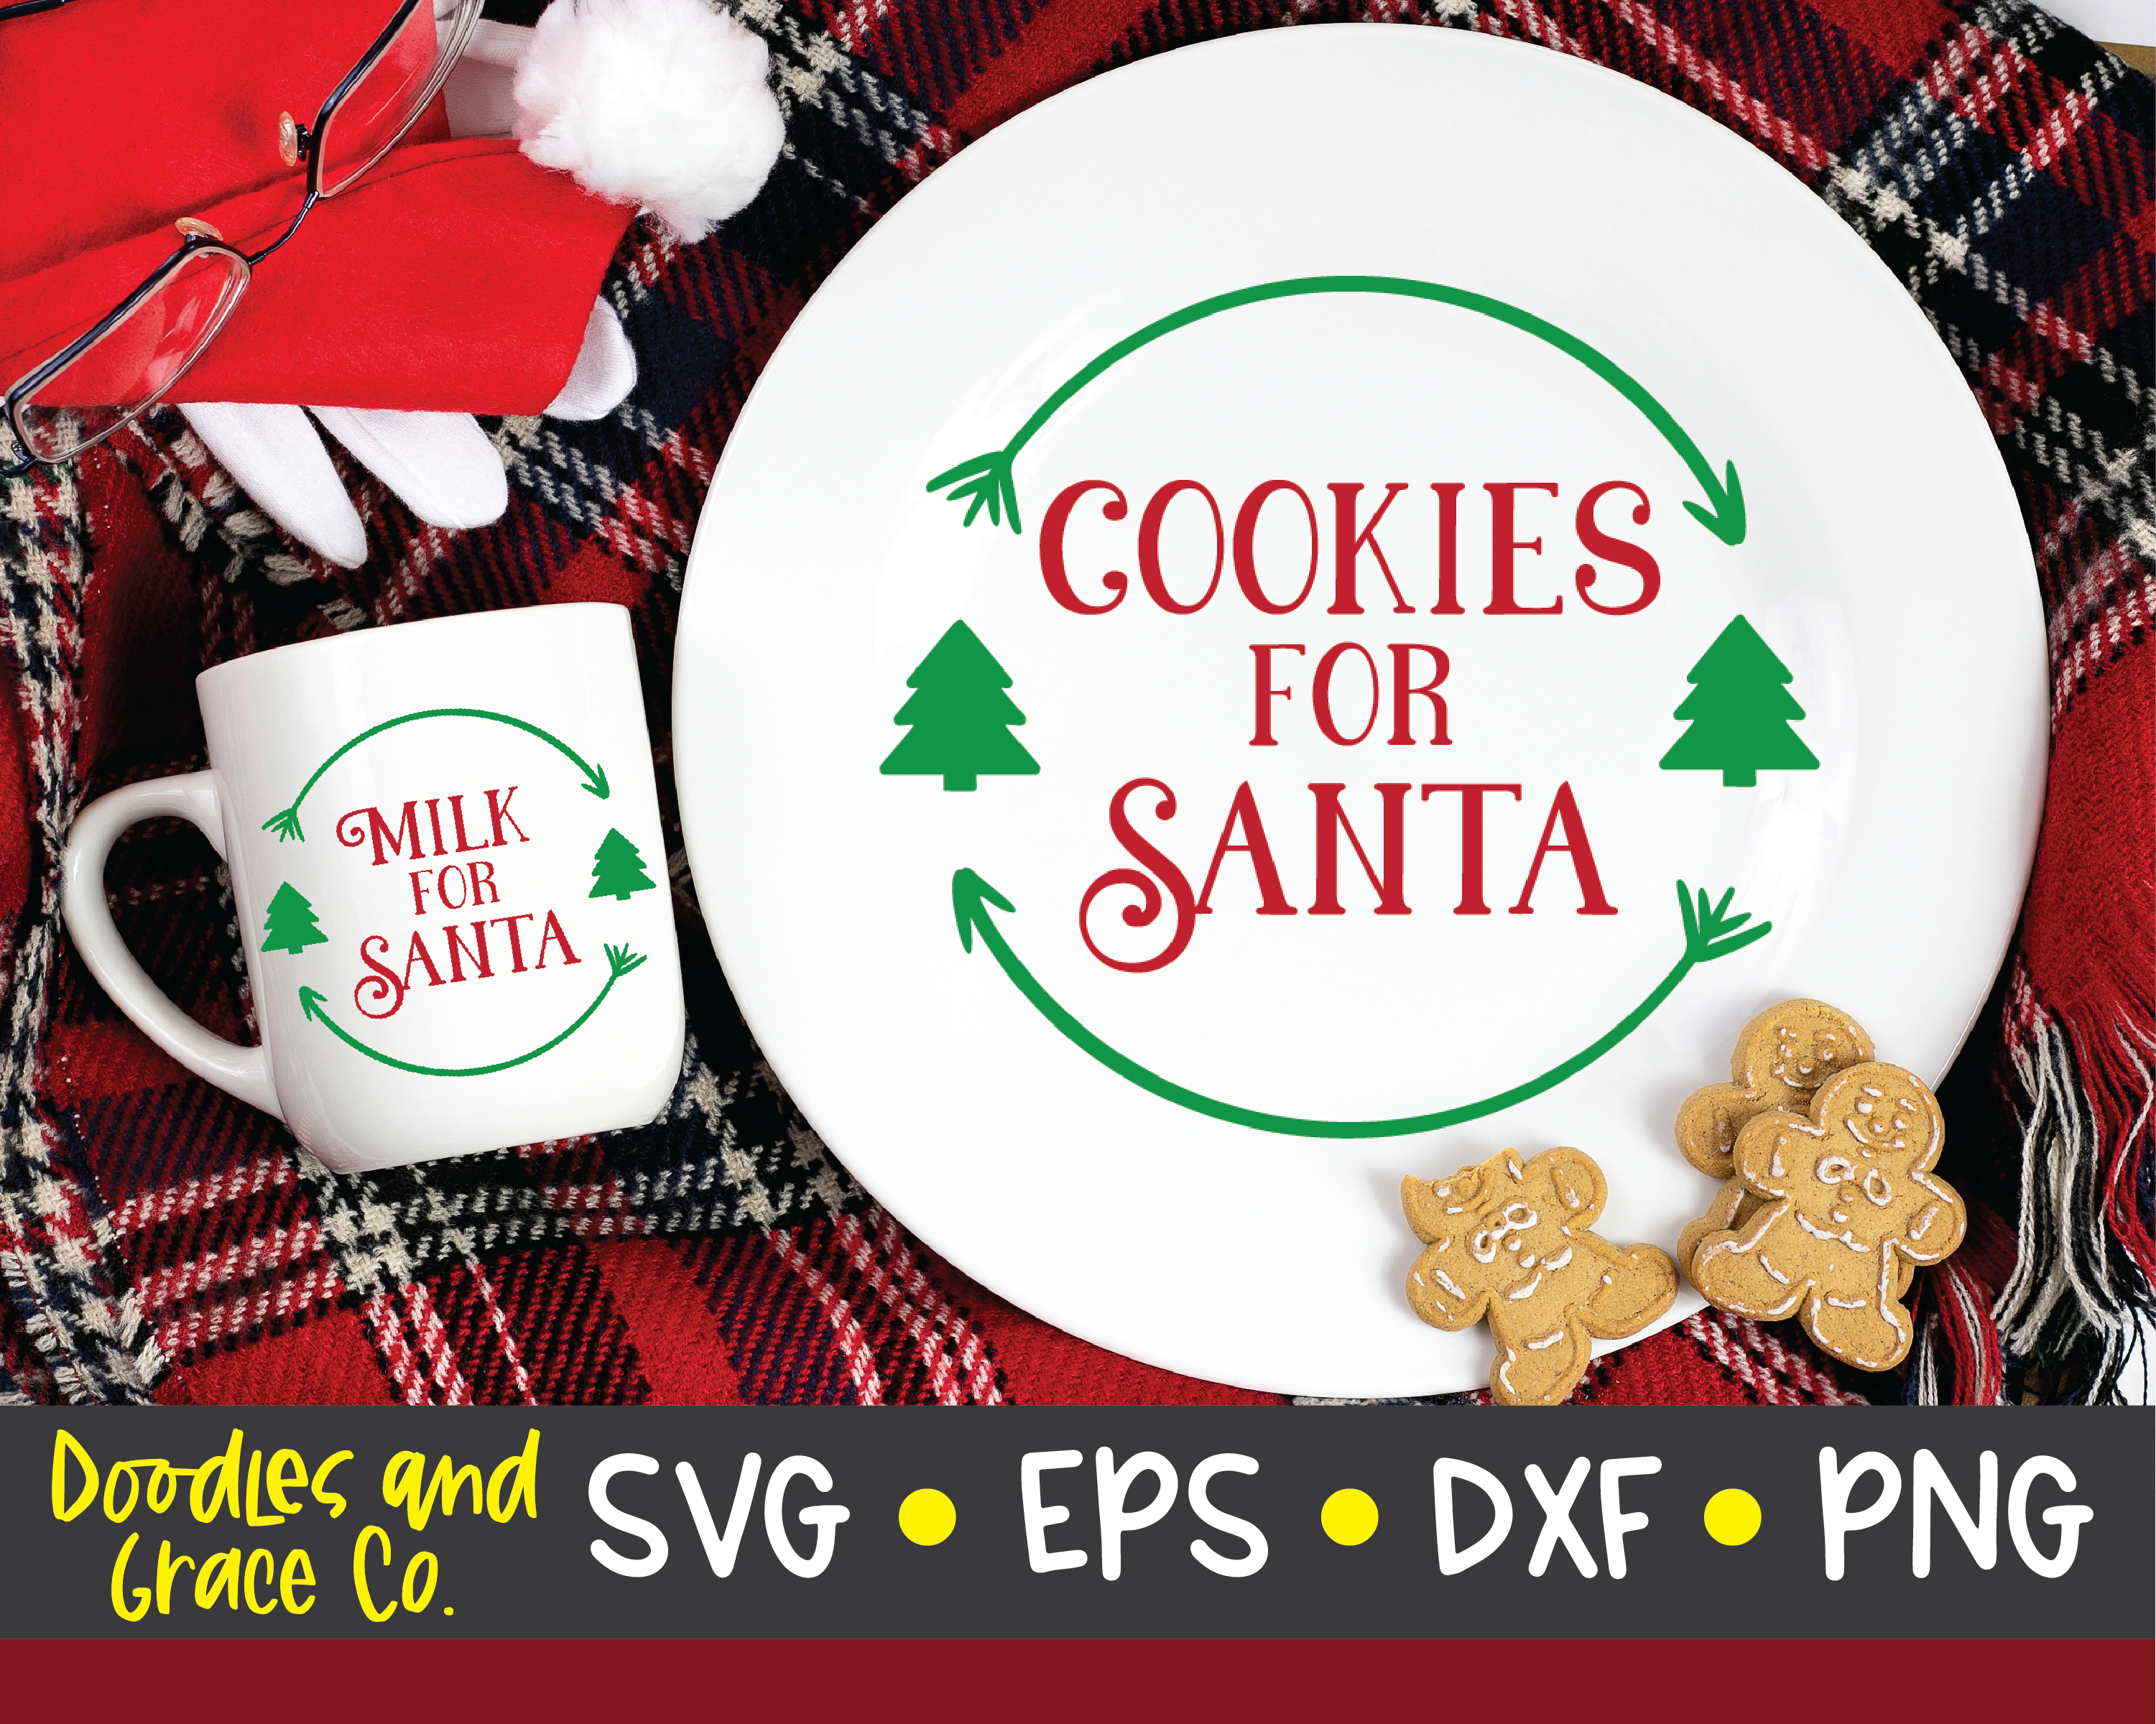 Cookies For Santa Milk For Santa svg / dxf / eps / png files SCAL Compatible with Cricut Digital download Silhouette Scan n Cut etc.